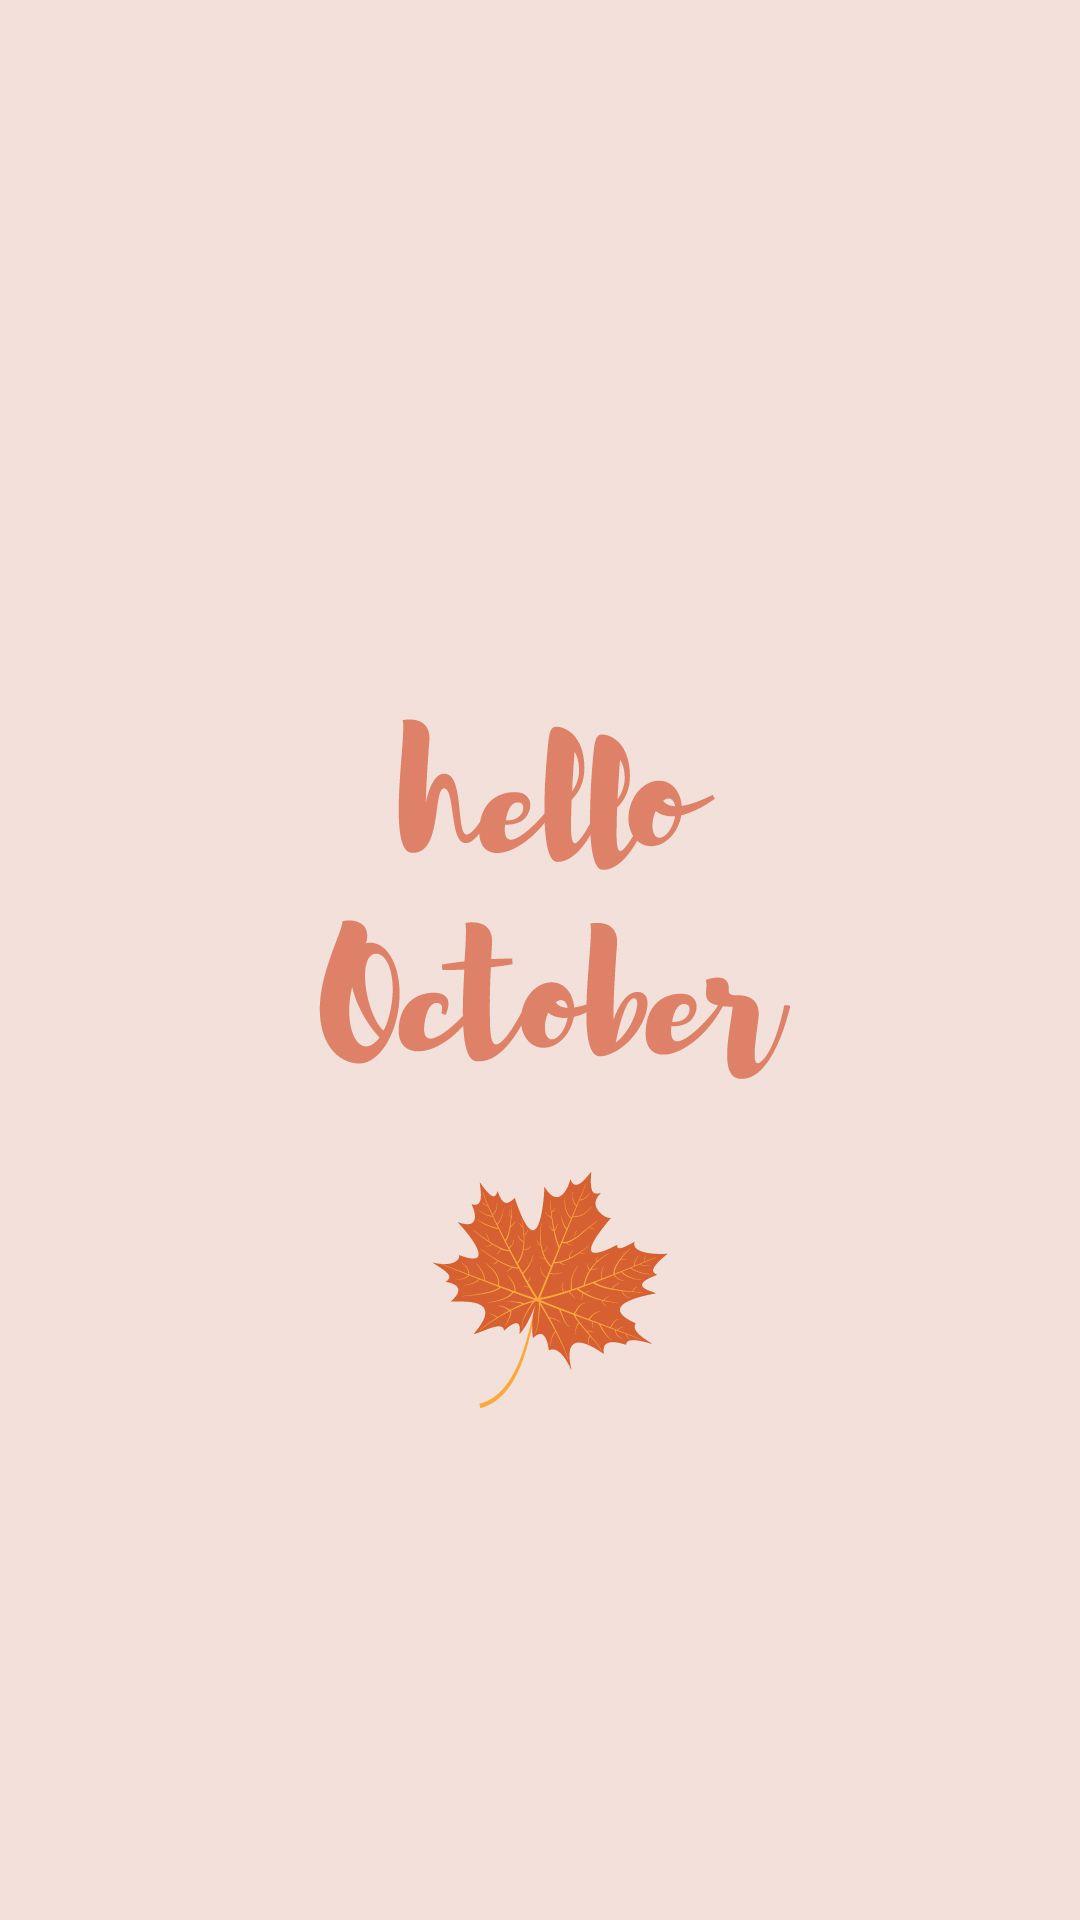 30 FREE Backgrounds Iphone Wallpaper Hello October